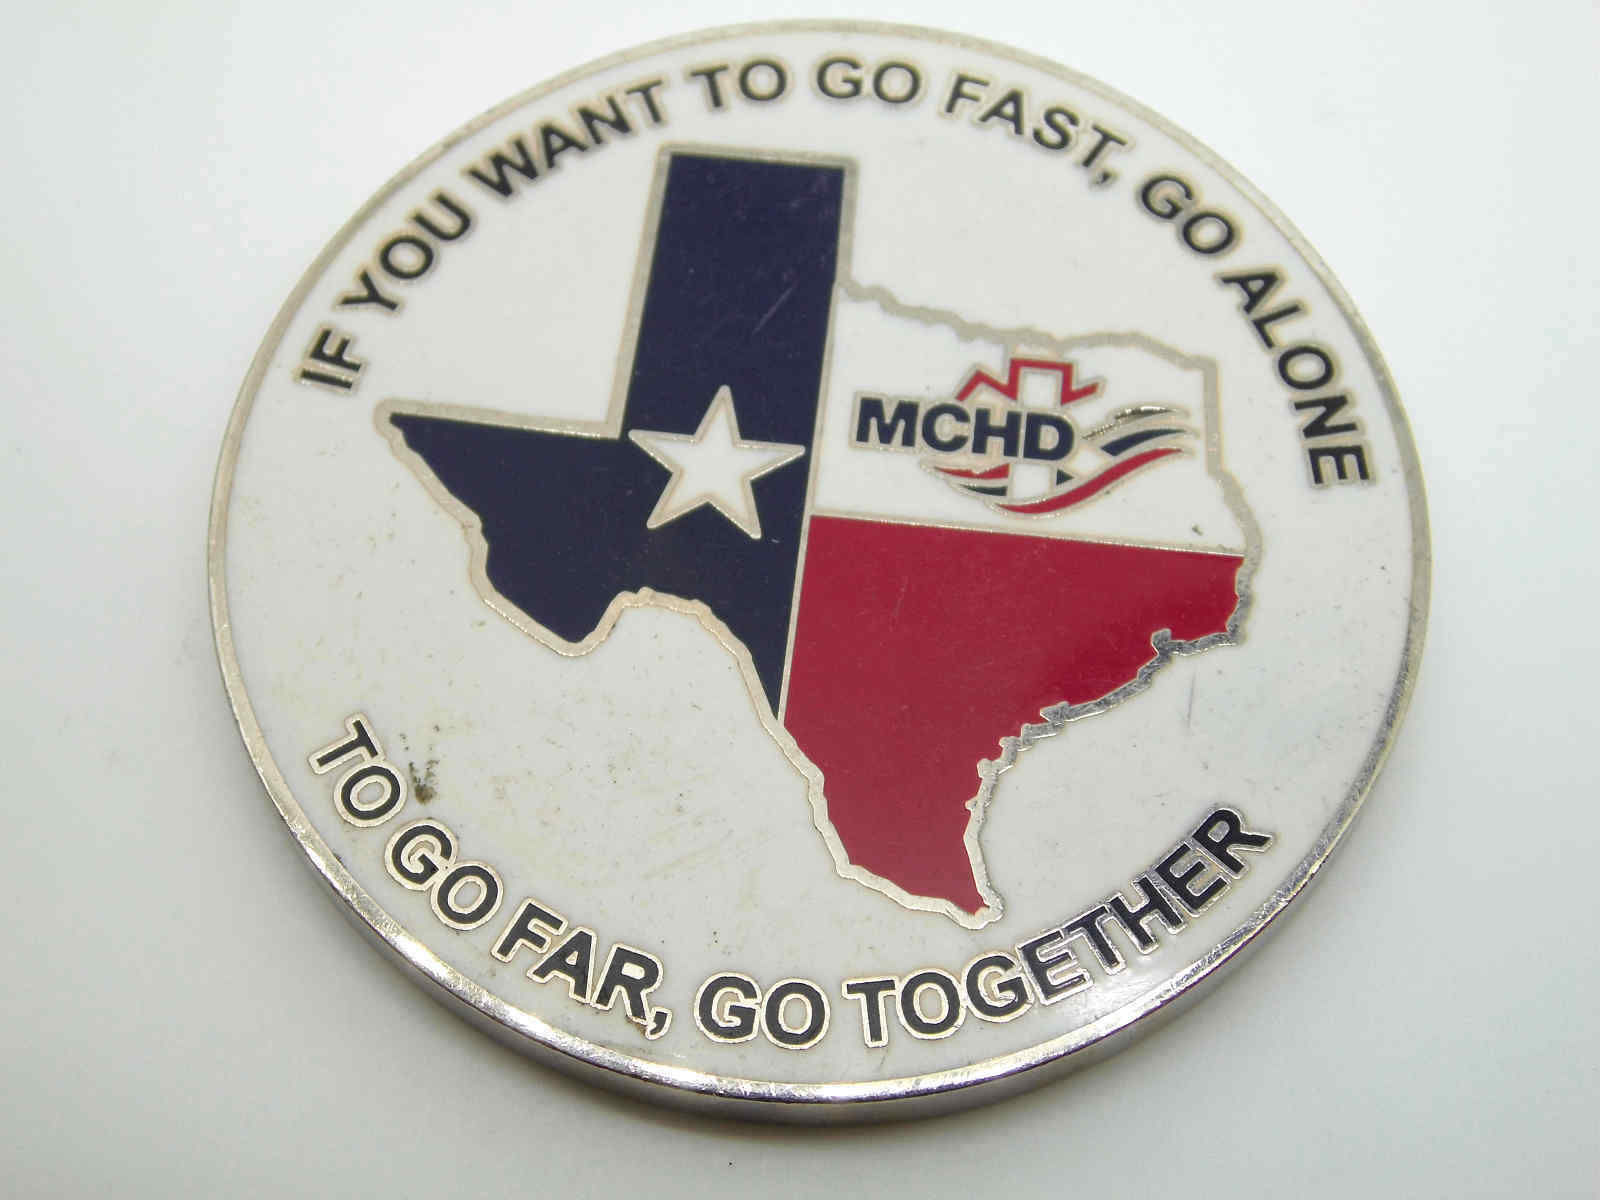 TO GO FAR GO TOGETHER RESPONSE CHALLENGE COIN